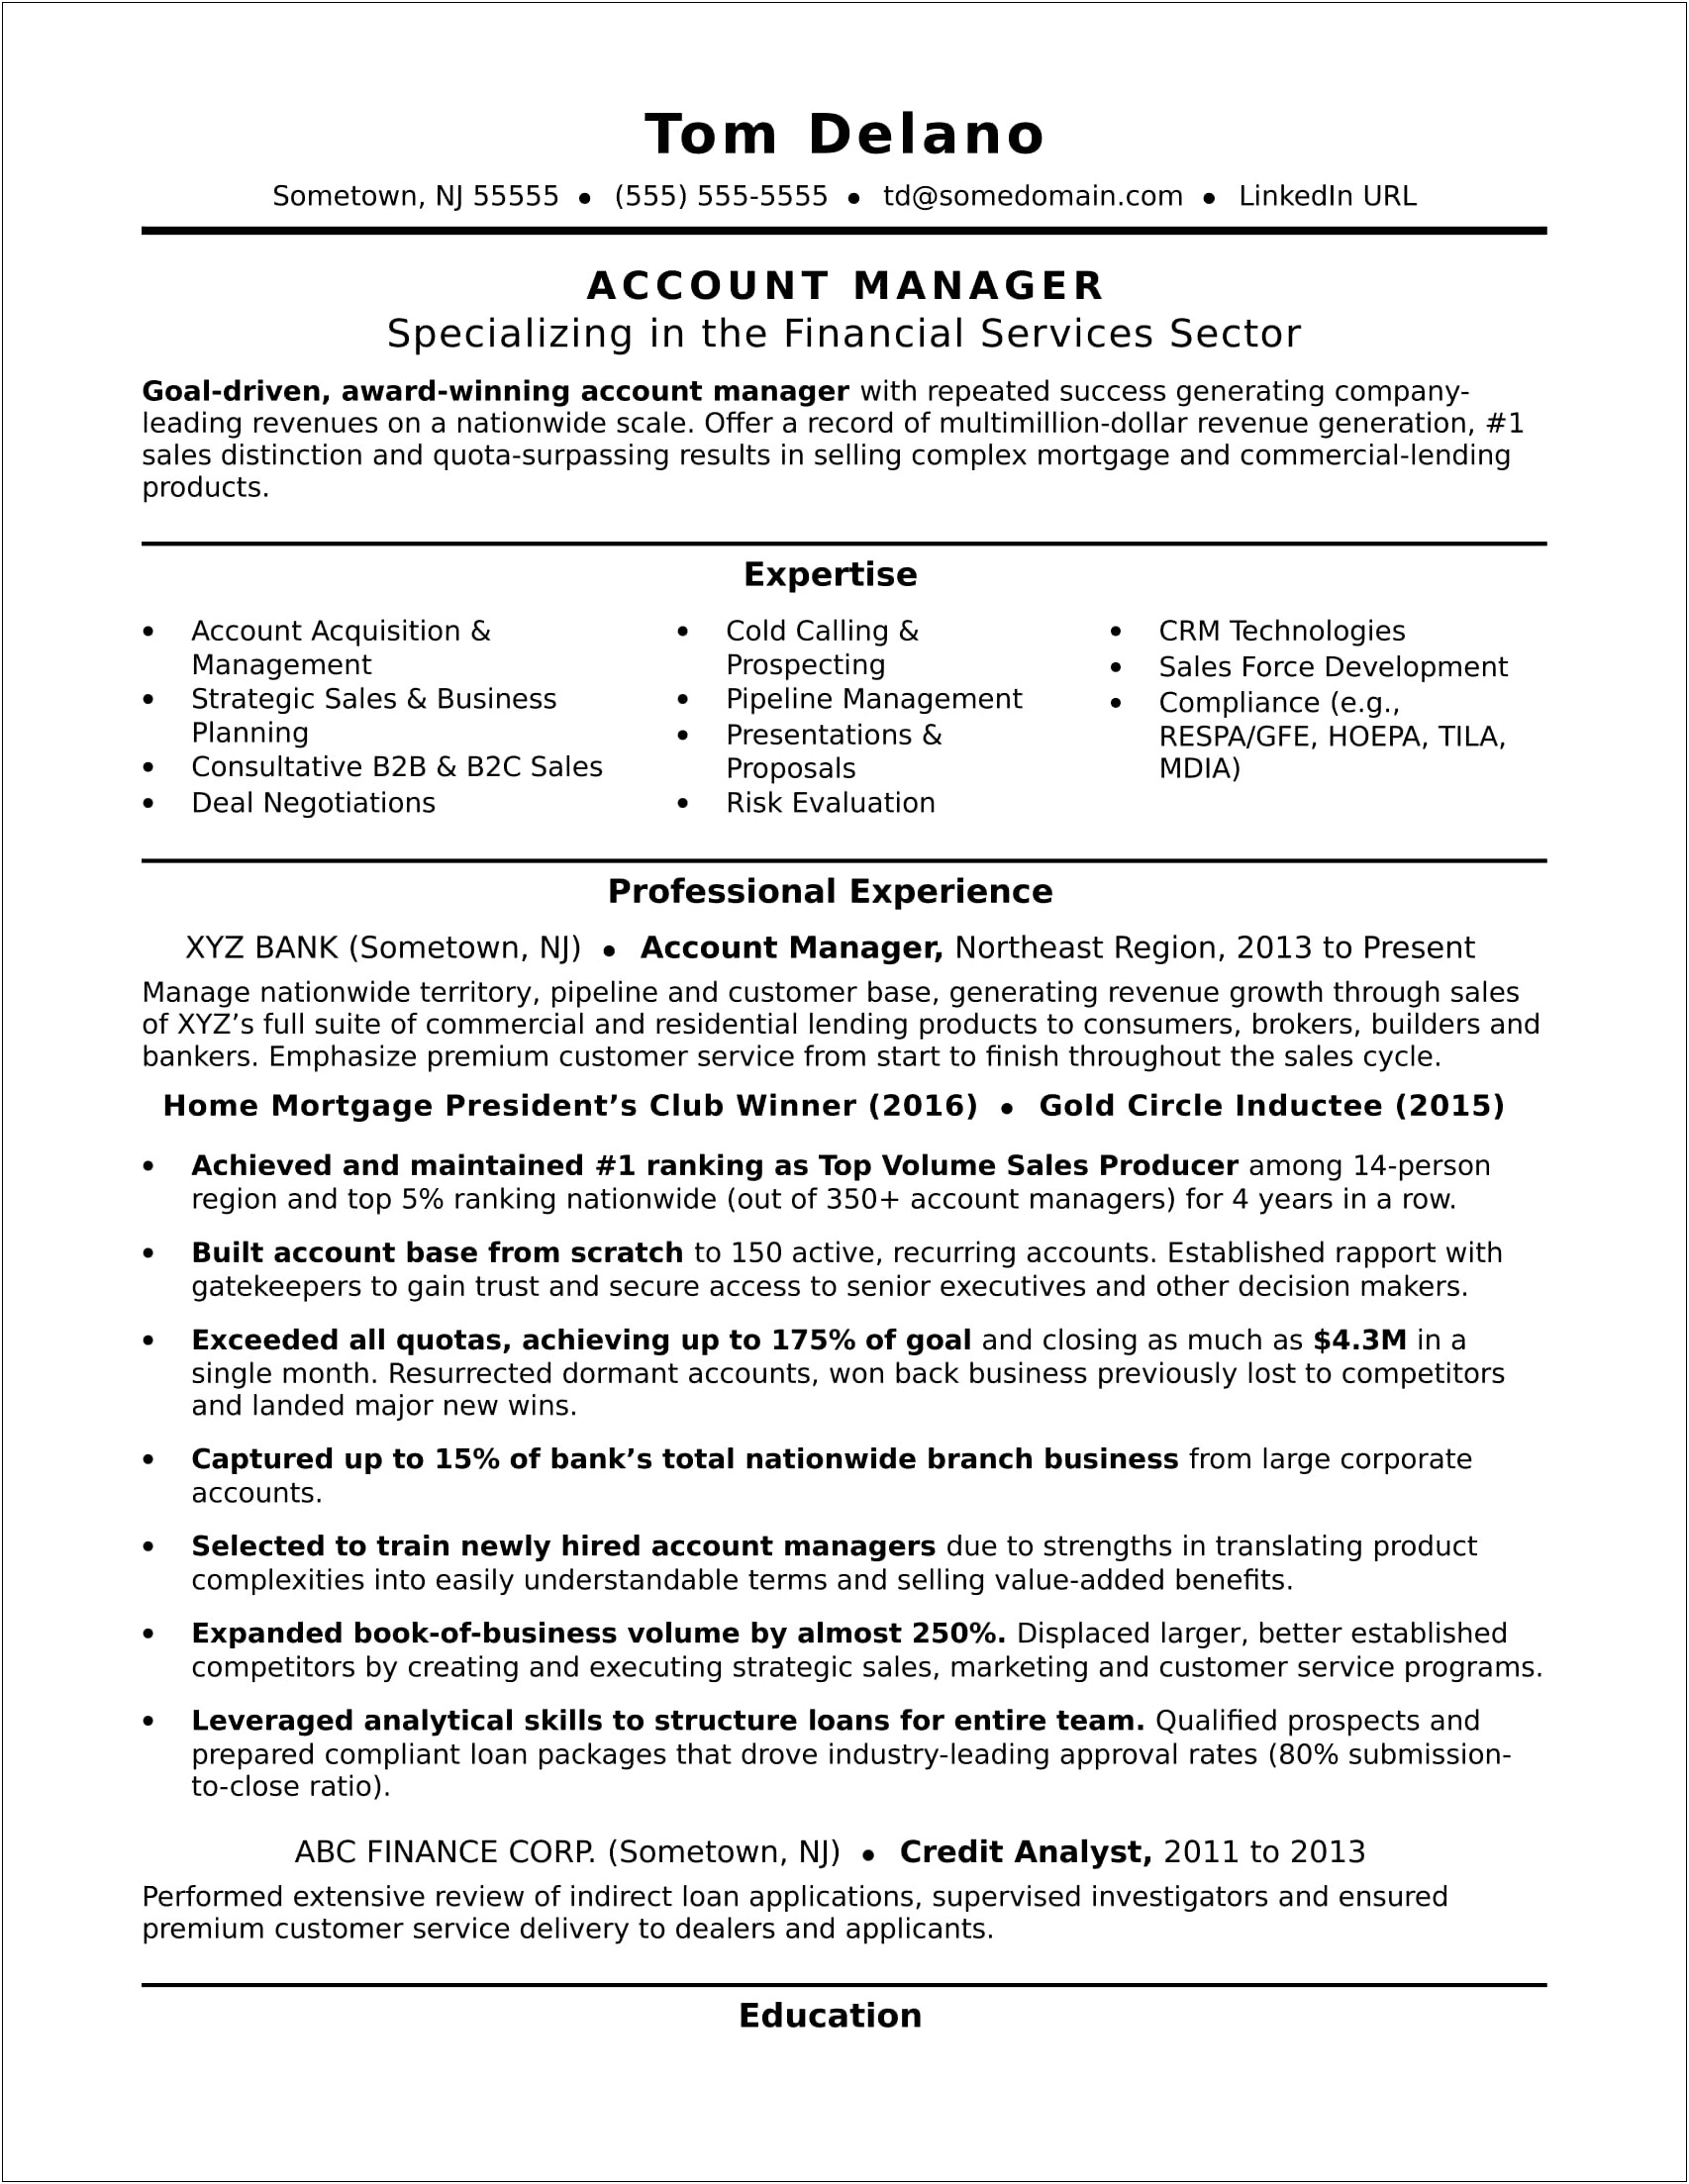 Management Skills And Abilities For Resume